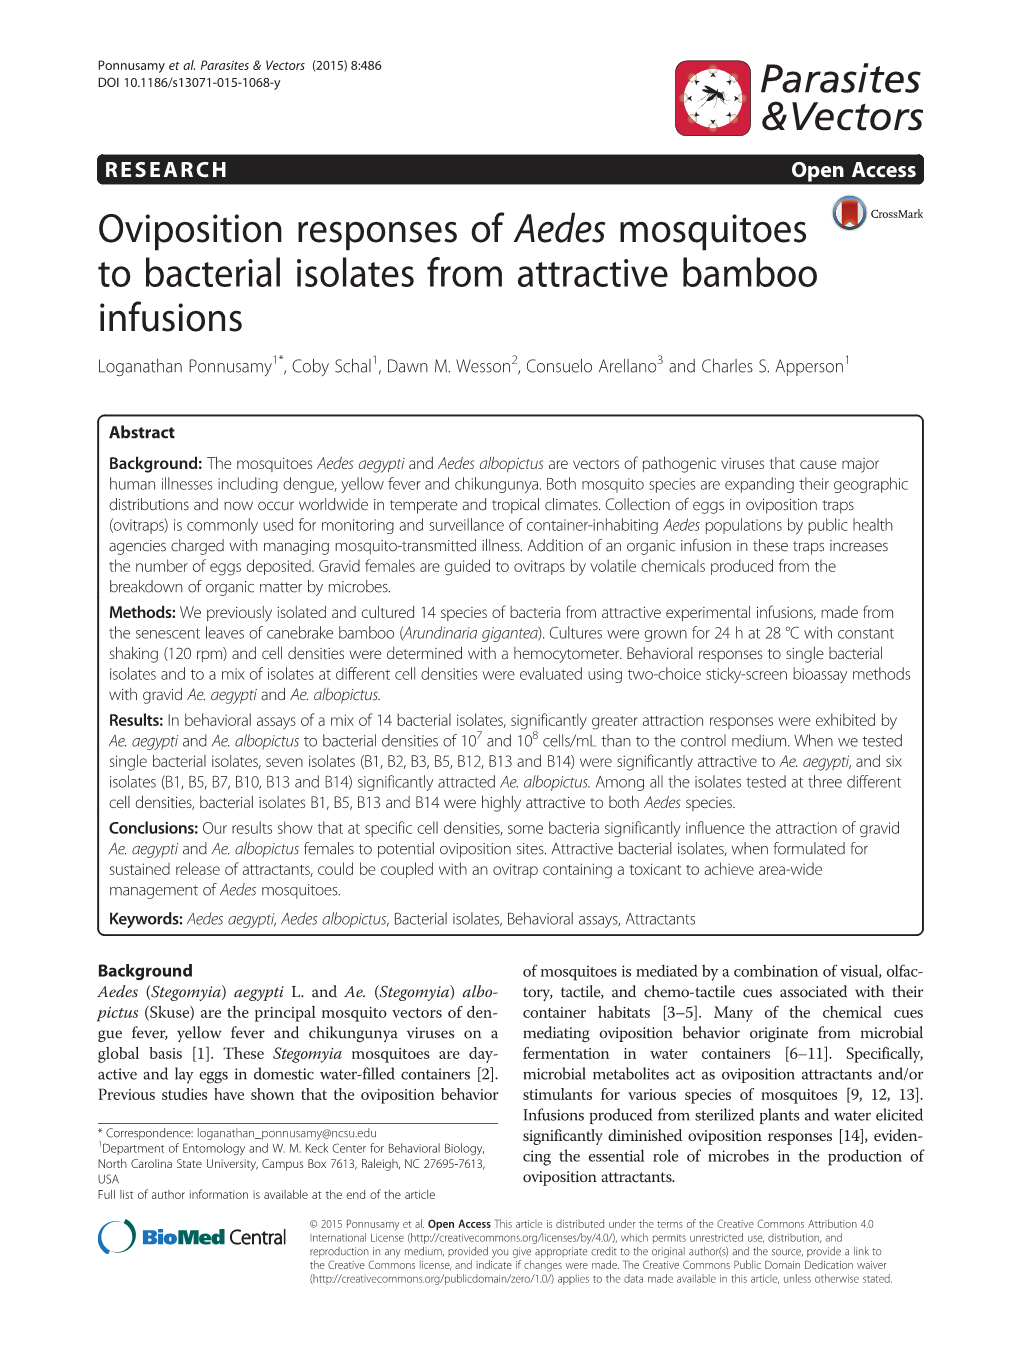 Oviposition Responses of Aedes Mosquitoes to Bacterial Isolates from Attractive Bamboo Infusions Loganathan Ponnusamy1*, Coby Schal1, Dawn M